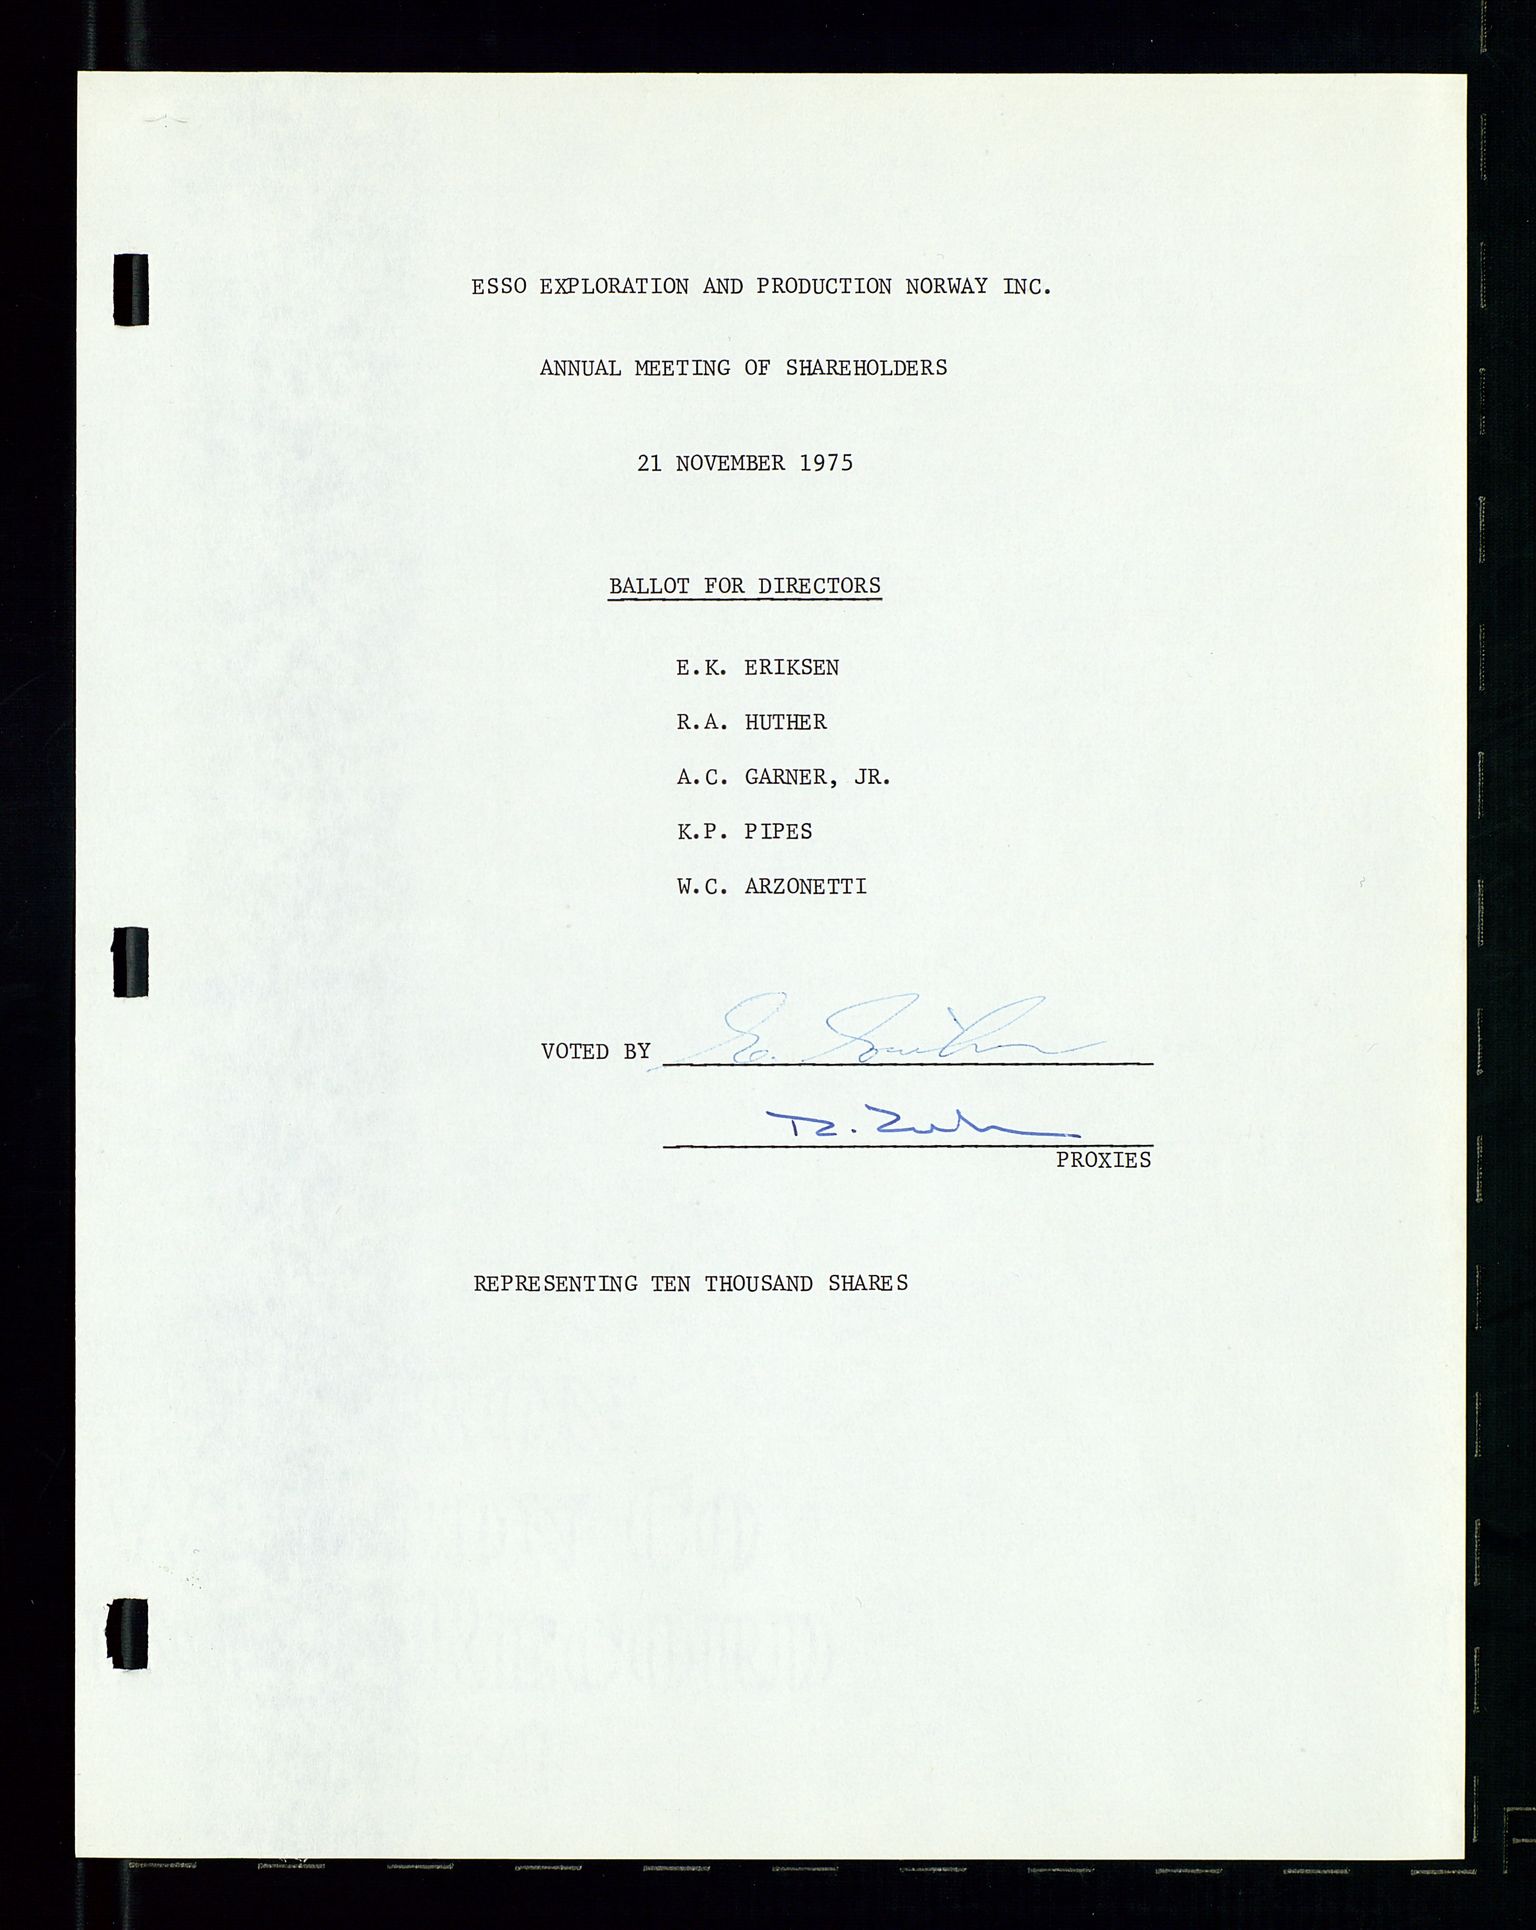 Pa 1512 - Esso Exploration and Production Norway Inc., SAST/A-101917/A/Aa/L0001/0002: Styredokumenter / Corporate records, Board meeting minutes, Agreements, Stocholder meetings, 1975-1979, p. 17